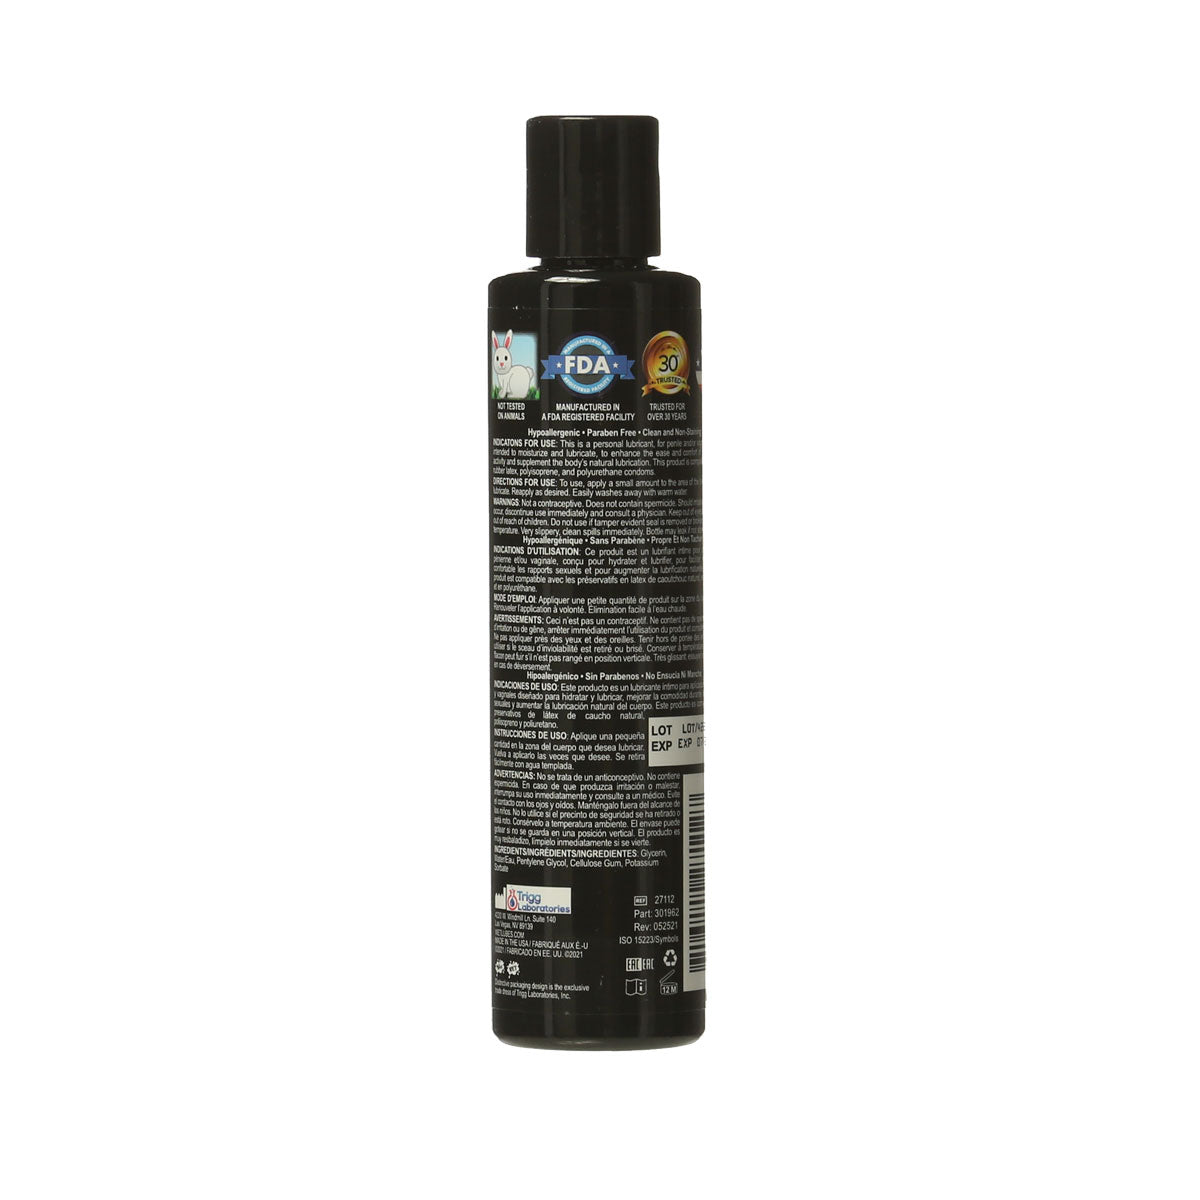 Wet Silver Water Based Lubricant – 6 oz.